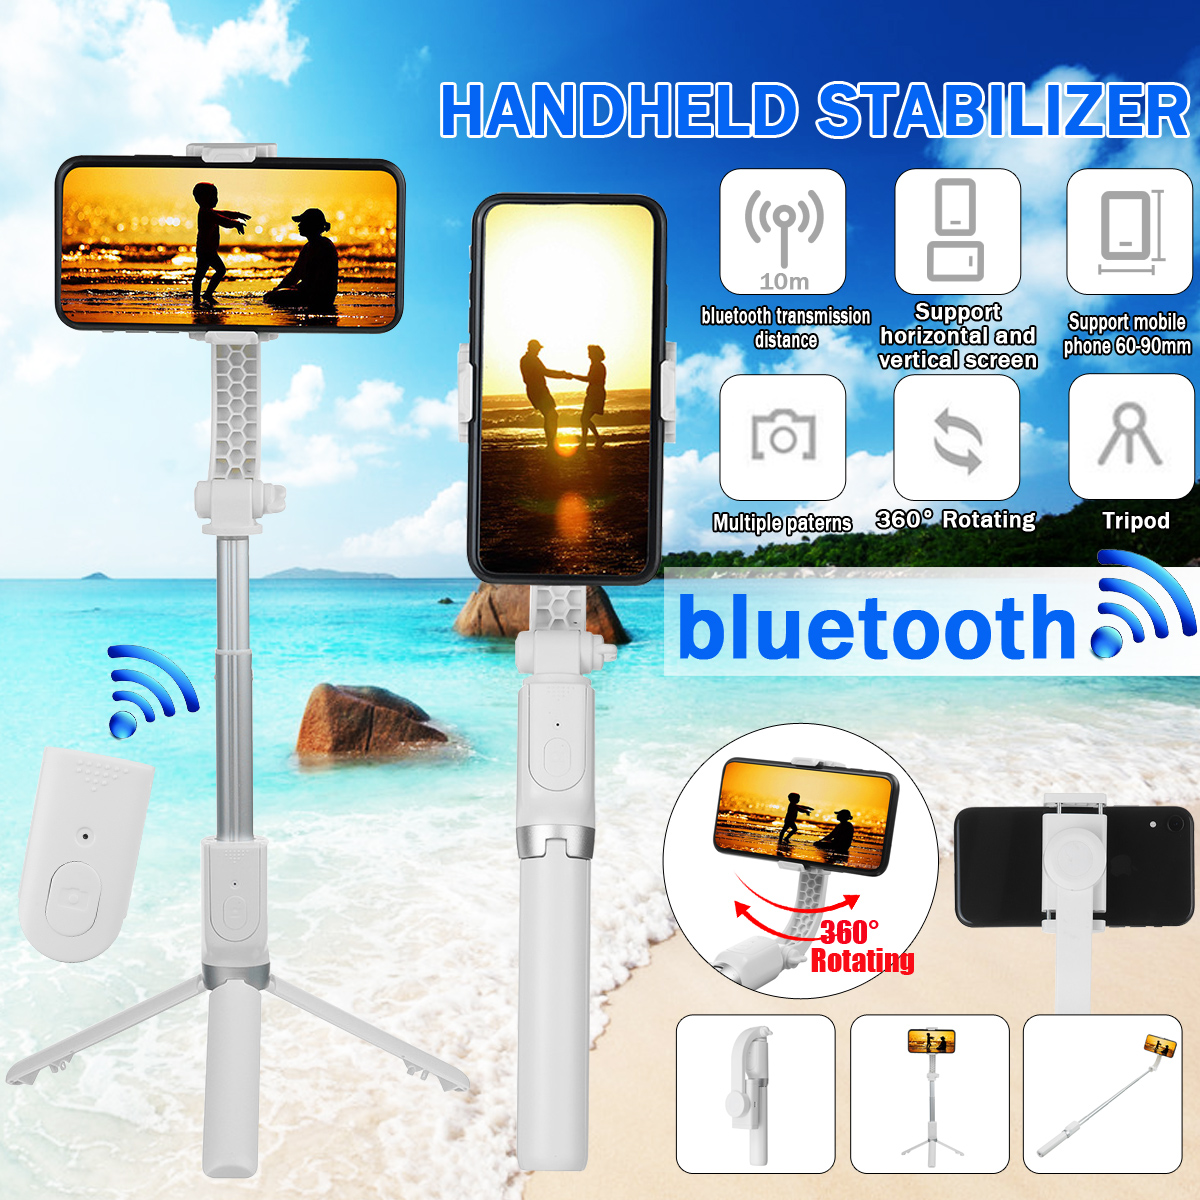 R15-Extended-Telescopic-bluetooth-Wireless-Handheld-Stabilizer-Mobile-Phone-Holder-Stand-for-Outdoor-1822120-1